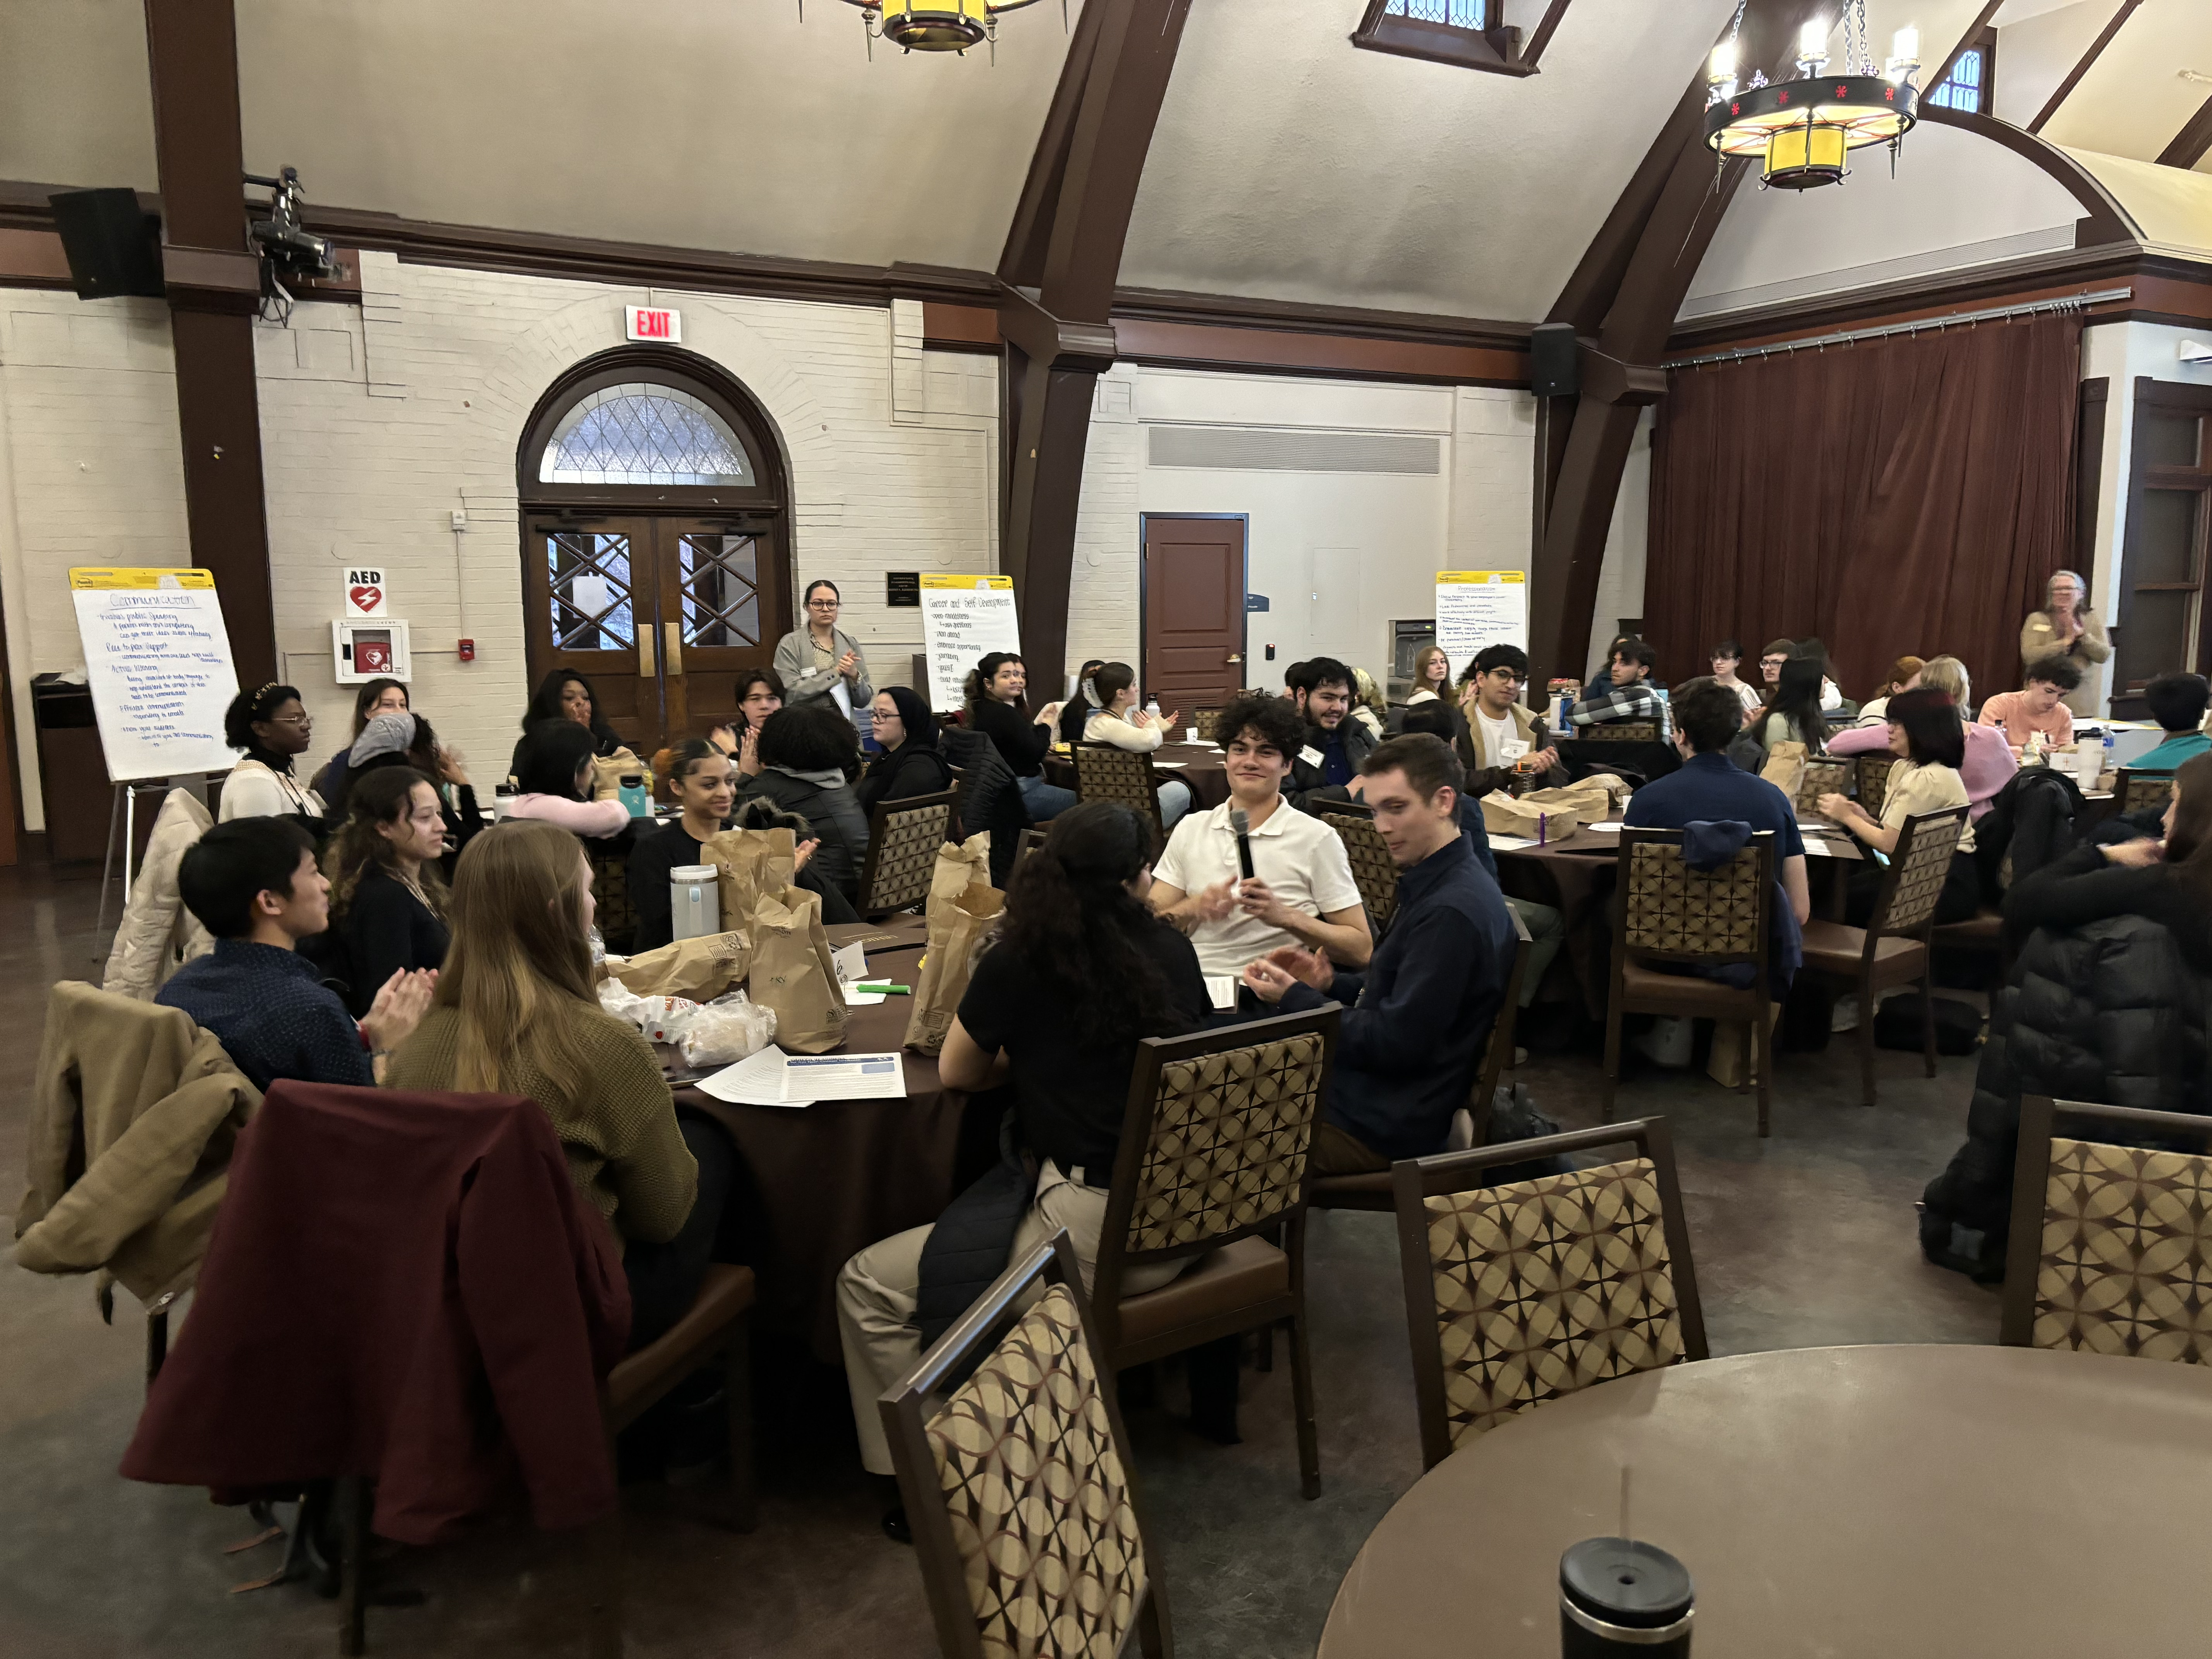 Lehigh University students seated at several round tables inside a large room